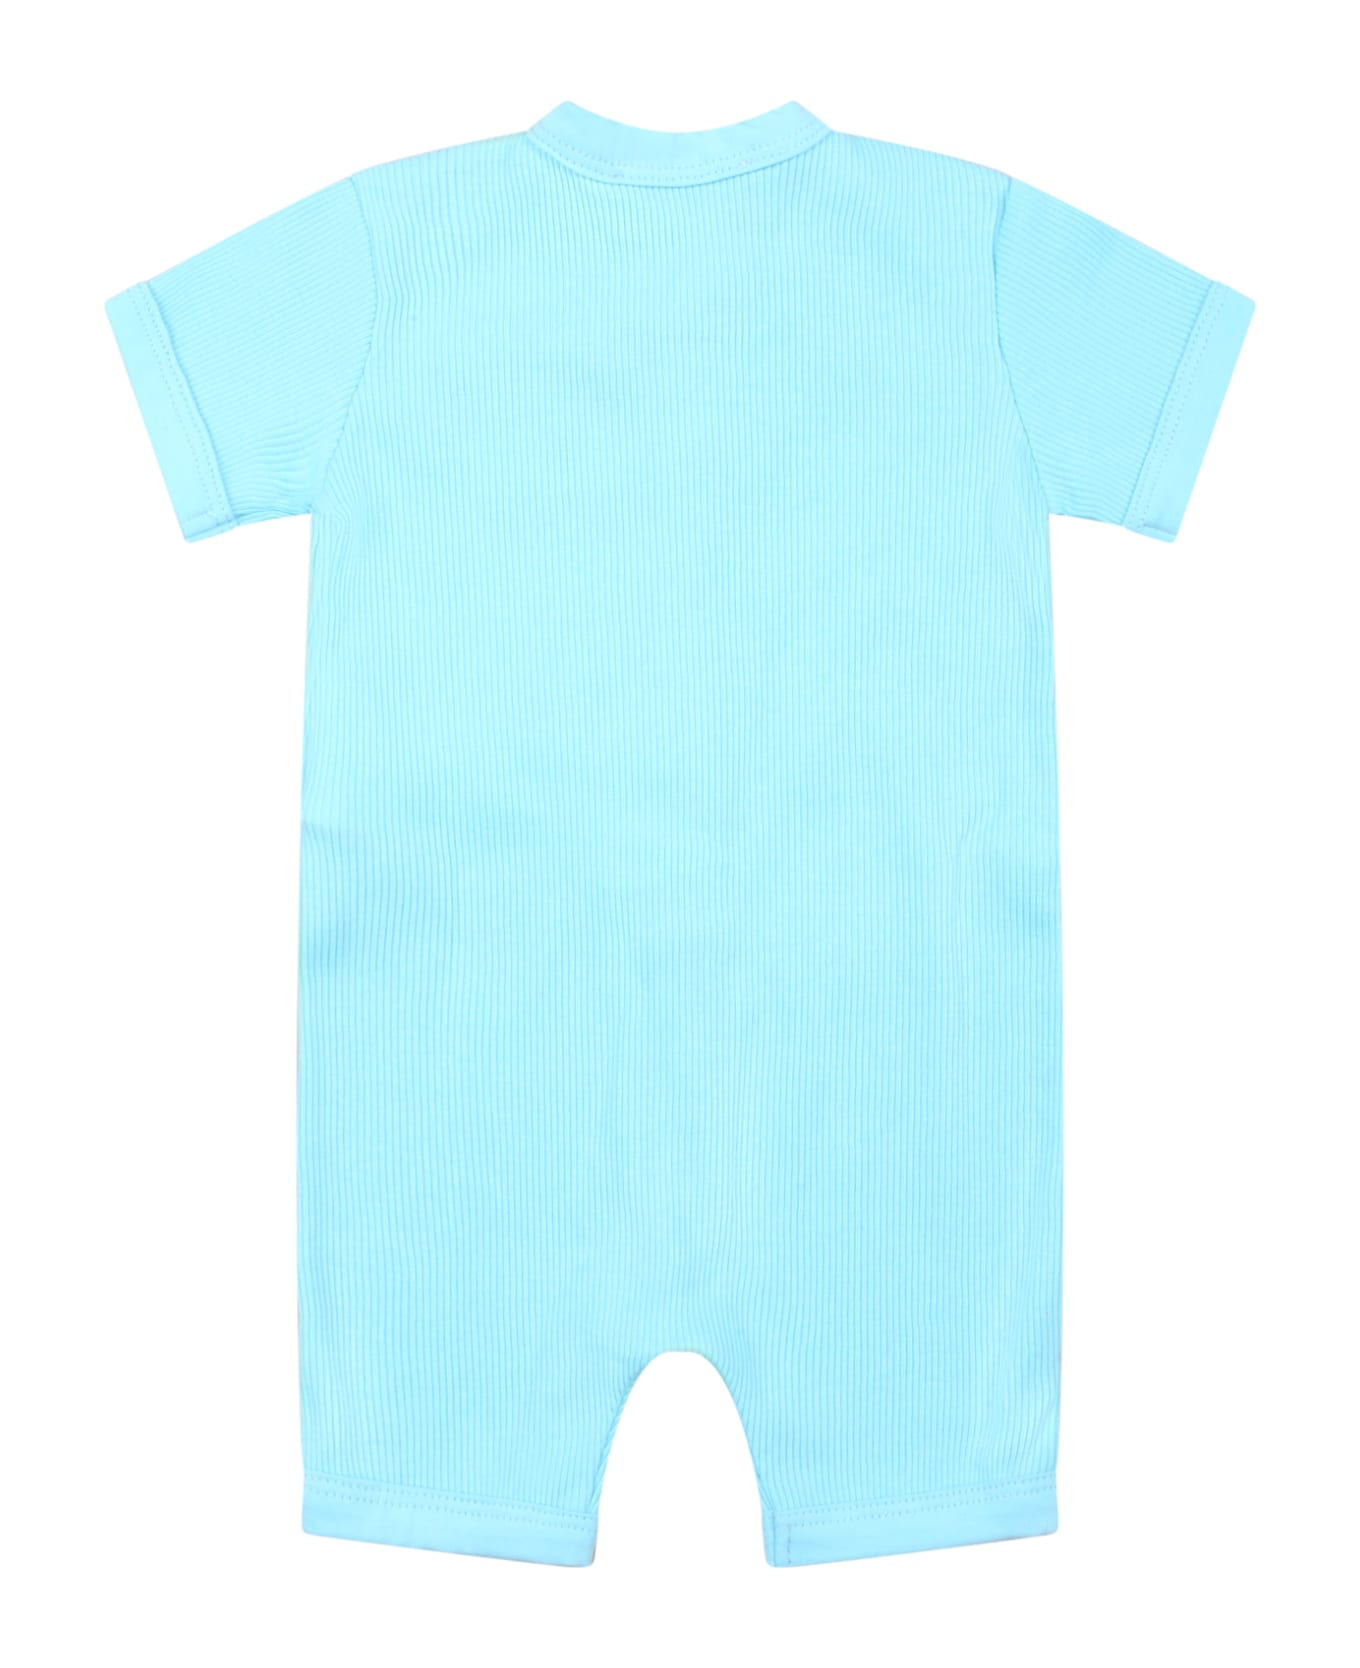 Moschino Light-blue Romper For Baby Boy With Teddy Bear - Light Blue